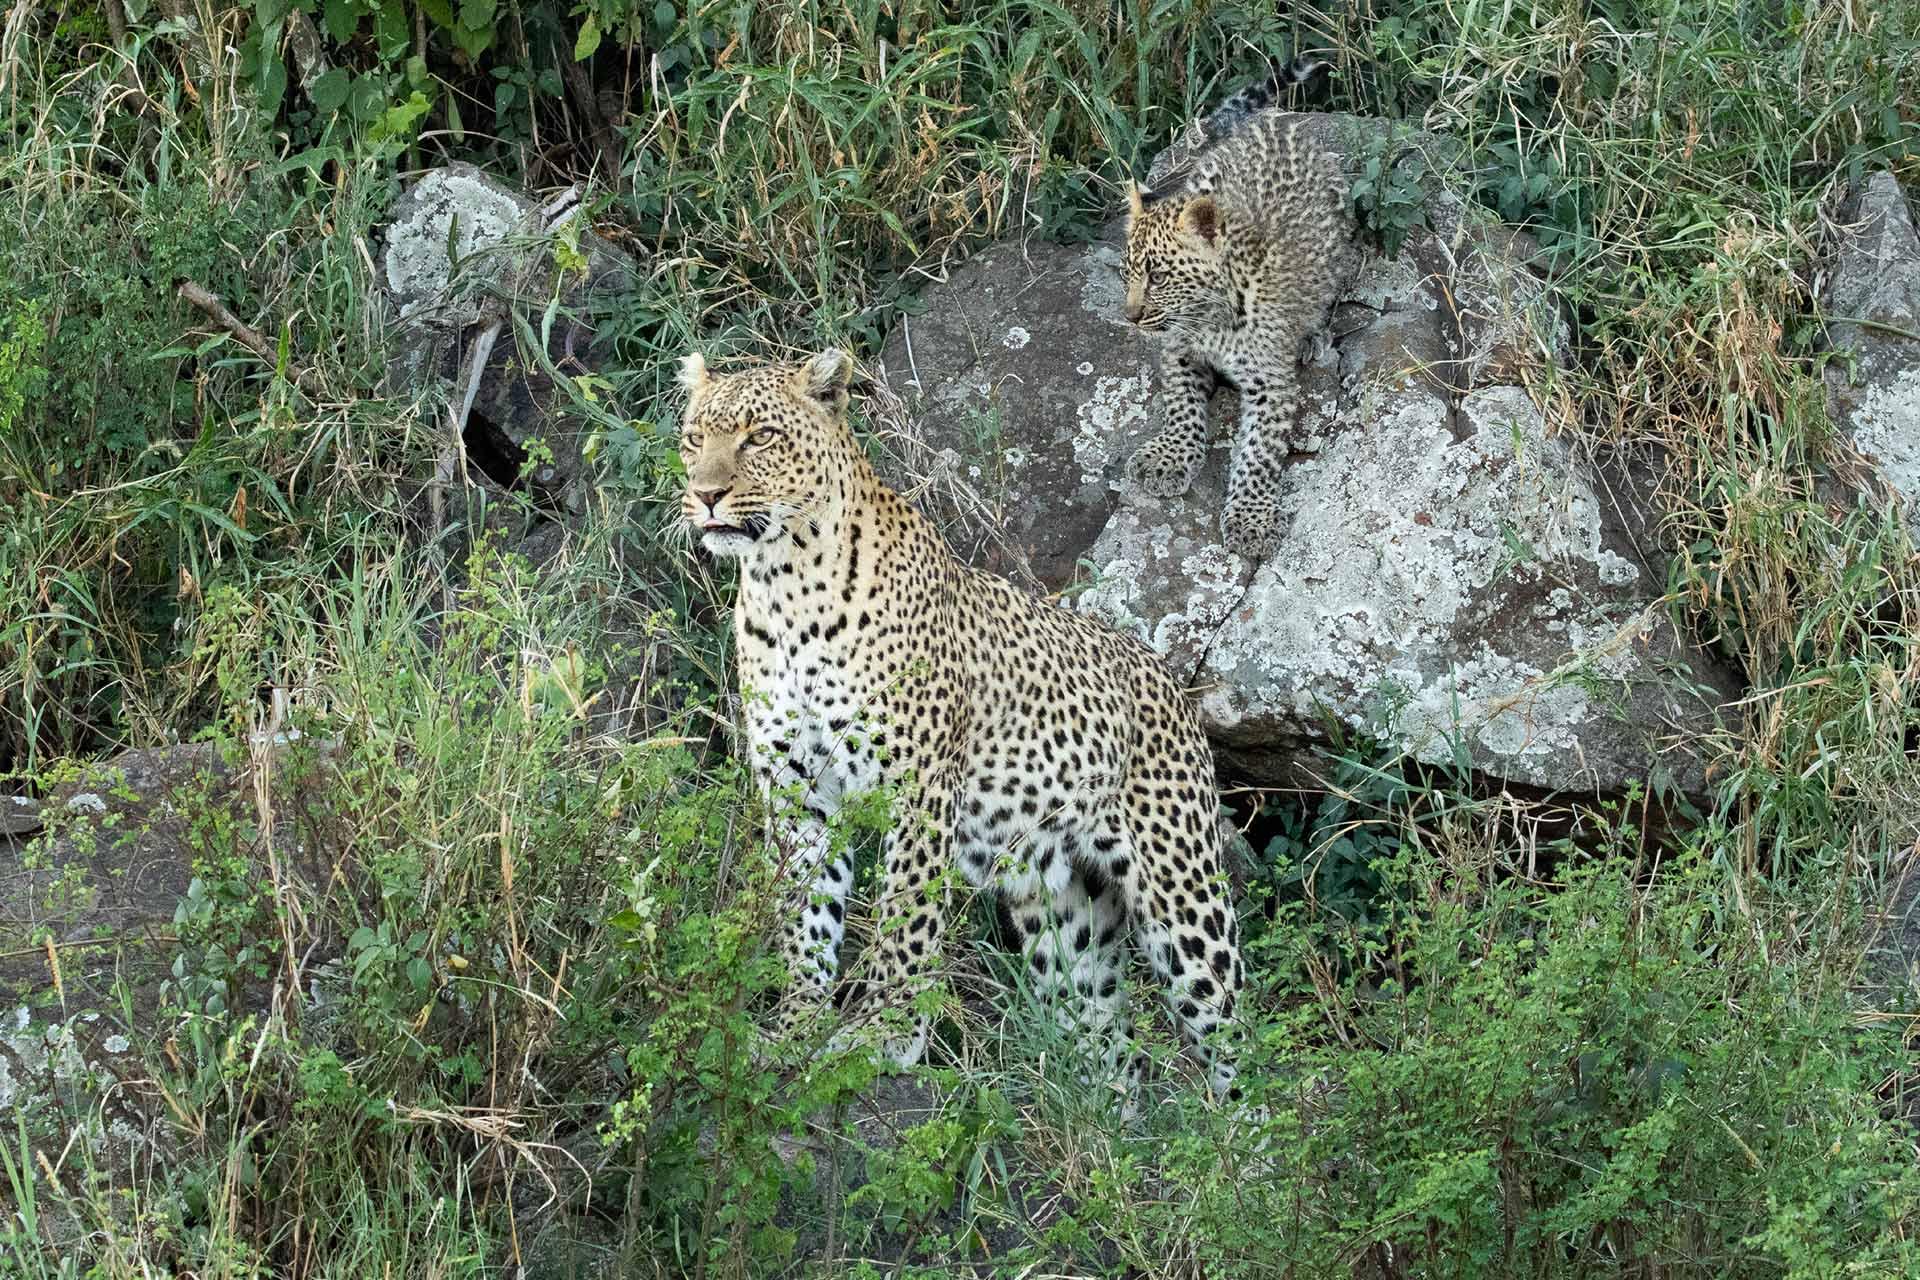 It is listed as Vulnerable on the IUCN Red List because leopard populations are threatened by habitat loss and fragmentation, and are declining in large parts of the global range\n